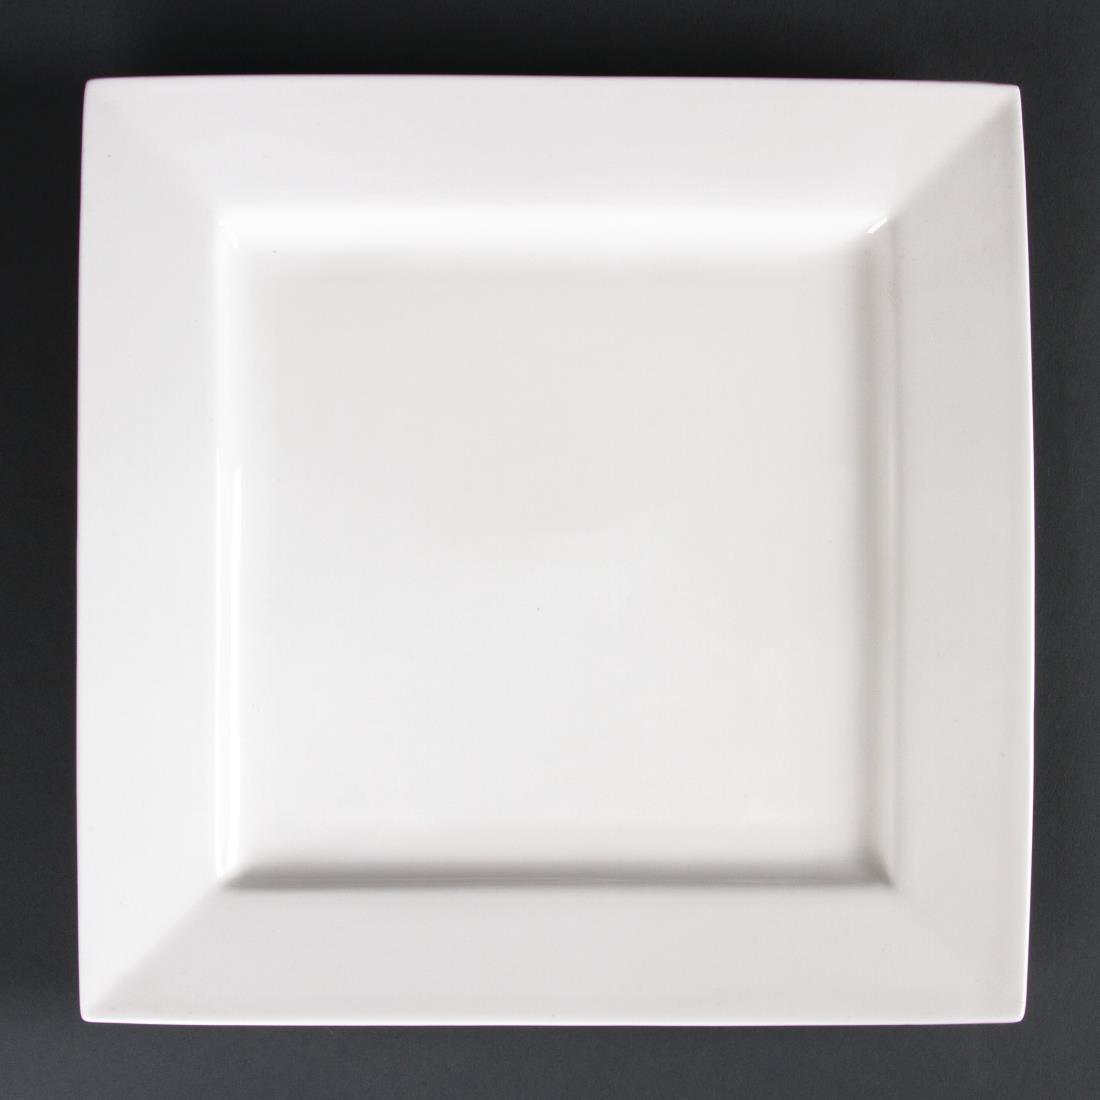 Olympia Lumina Square Plates 265mm (Pack of 4) - DP965  - 1